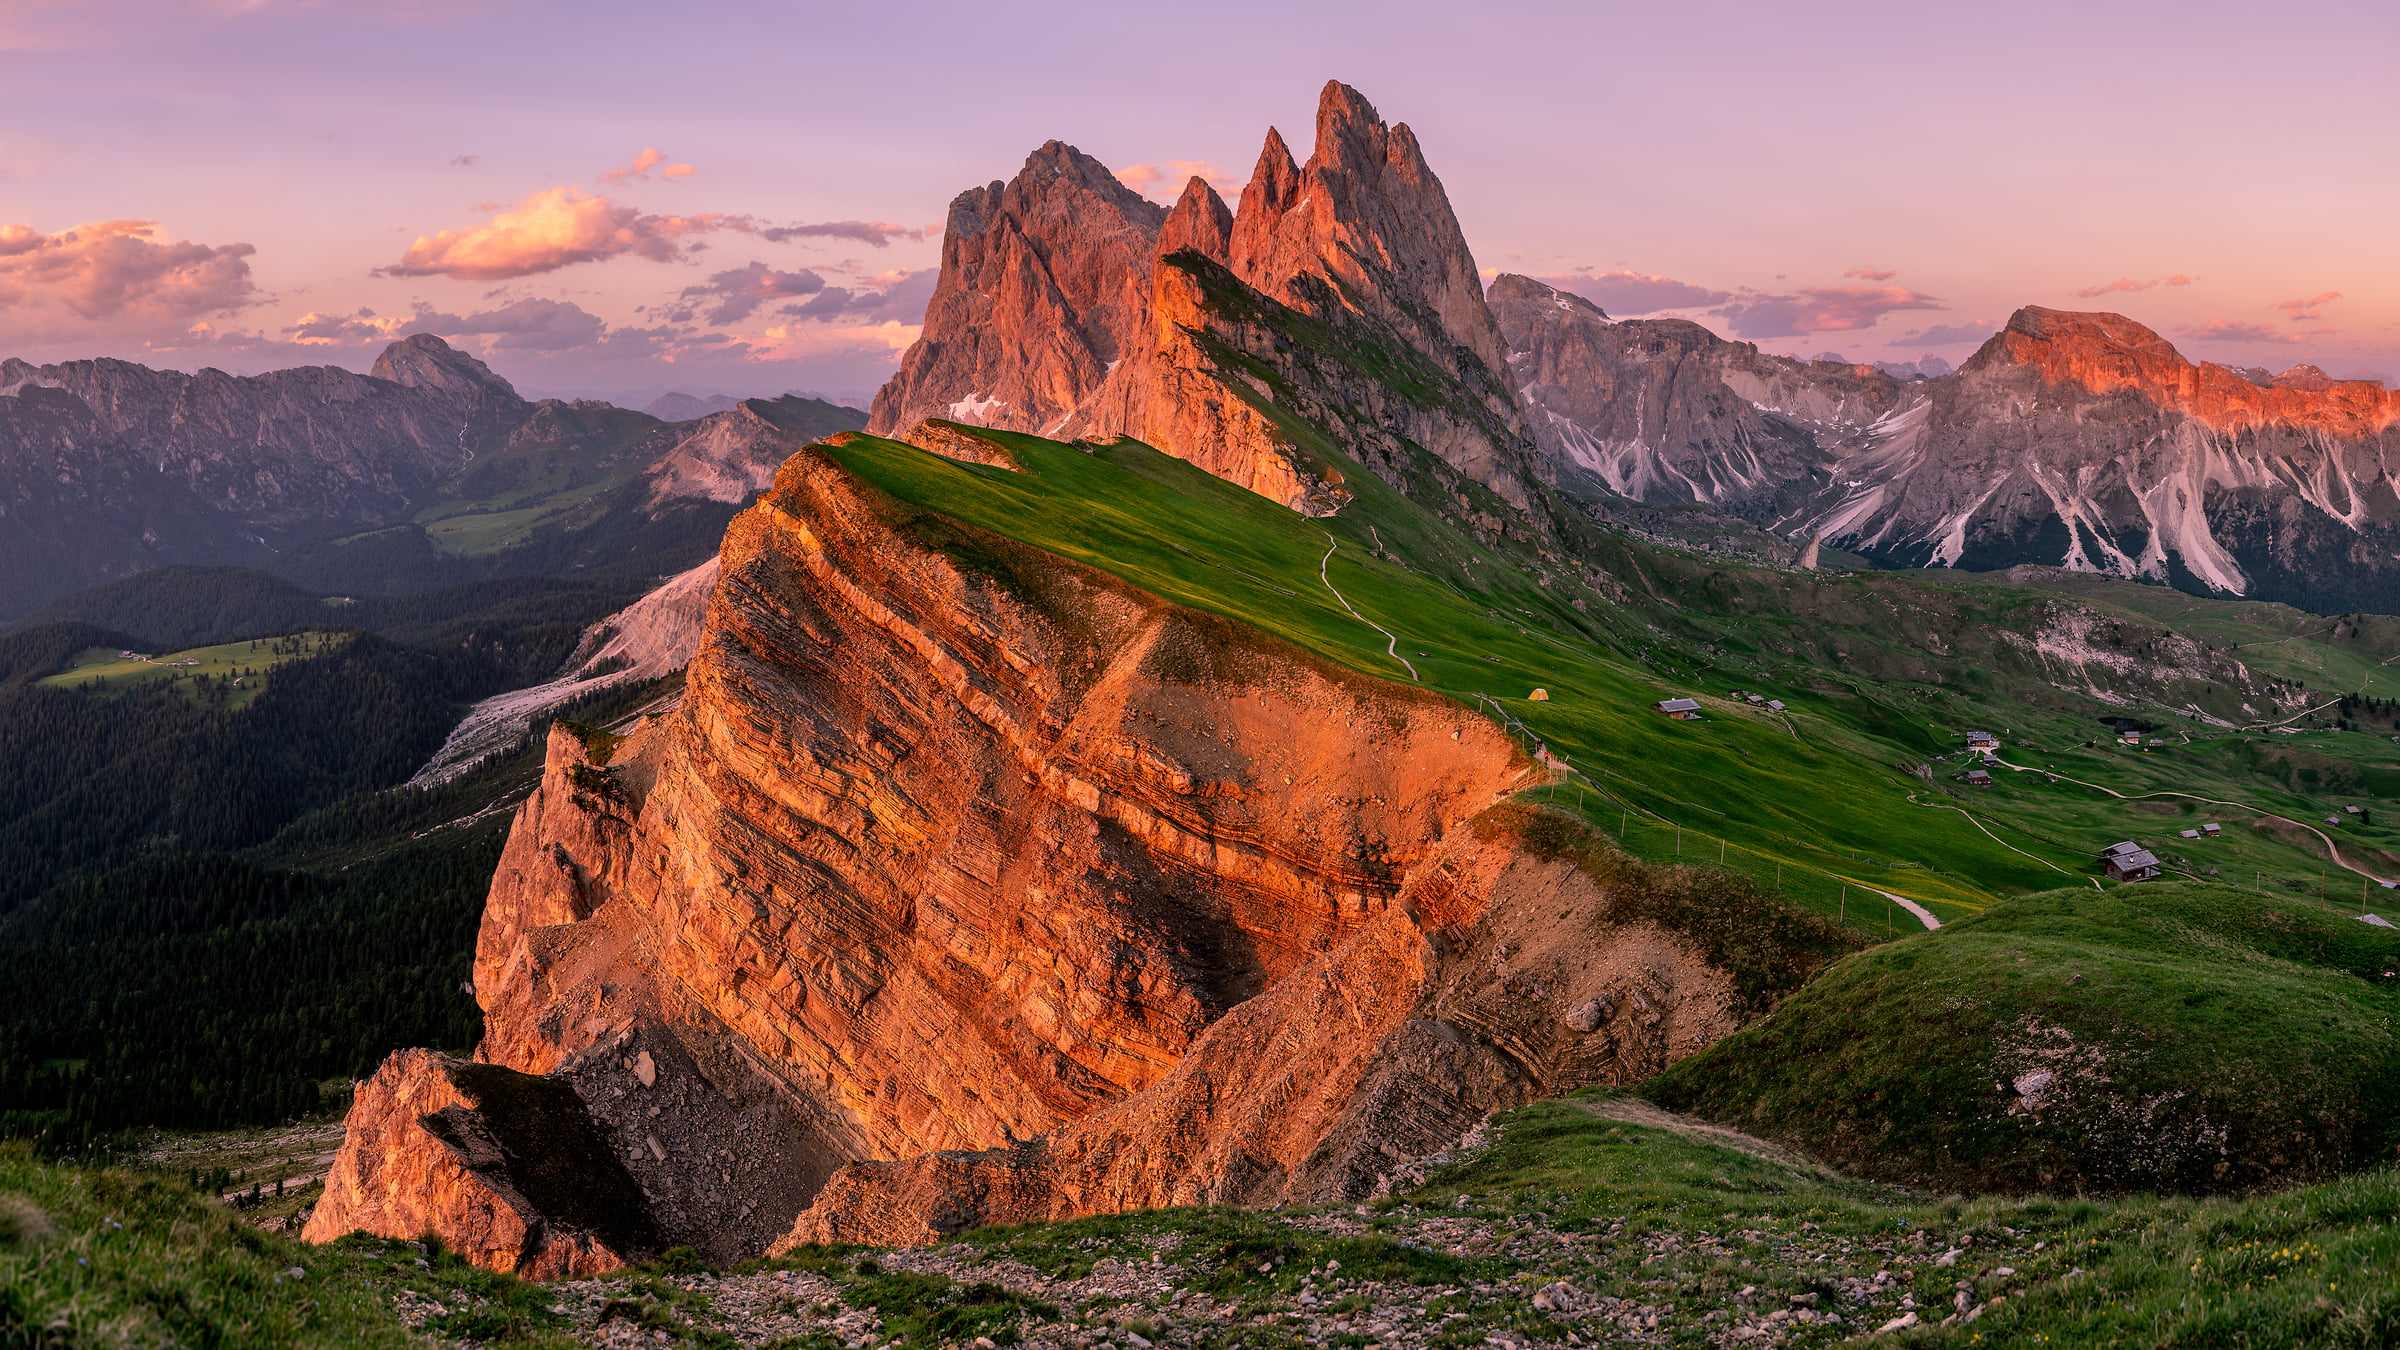 376 megapixels! A very high resolution, large-format VAST photo print of a landscape at sunset; landscape photograph created by Tim Shields in Seceda, Santa Cristina Valgardena, Italy